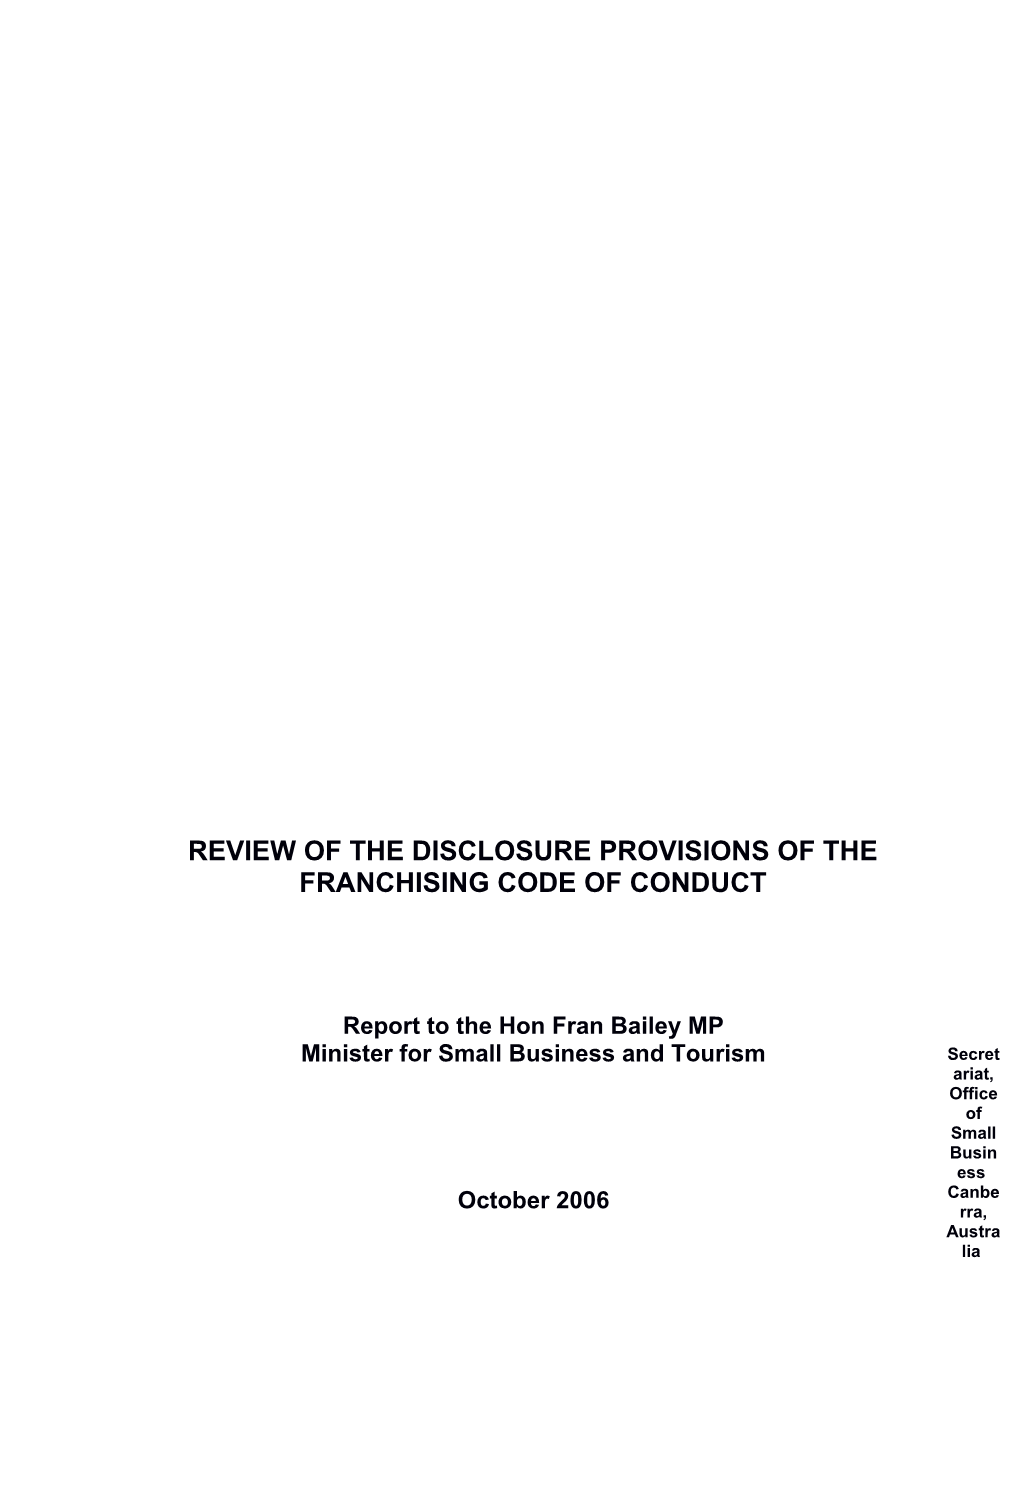 Report of the 2Nd Review of the Franchising Code of Conduct - October 2006